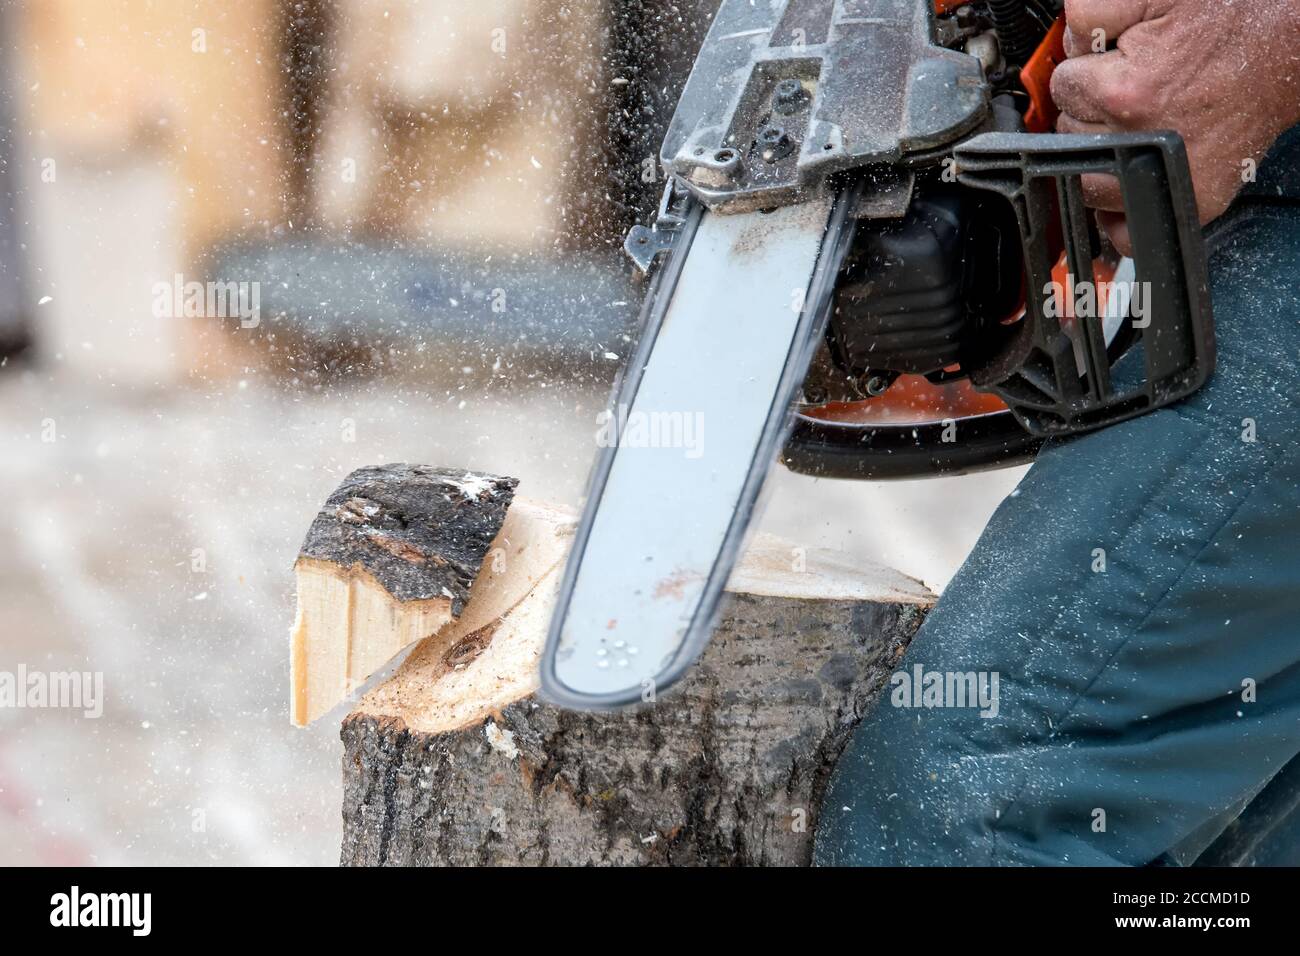 A chainsaw cutting a vertical log. The chain is blurred due to motion. Sawdust flies around as a piece of wood falls off. Stock Photo